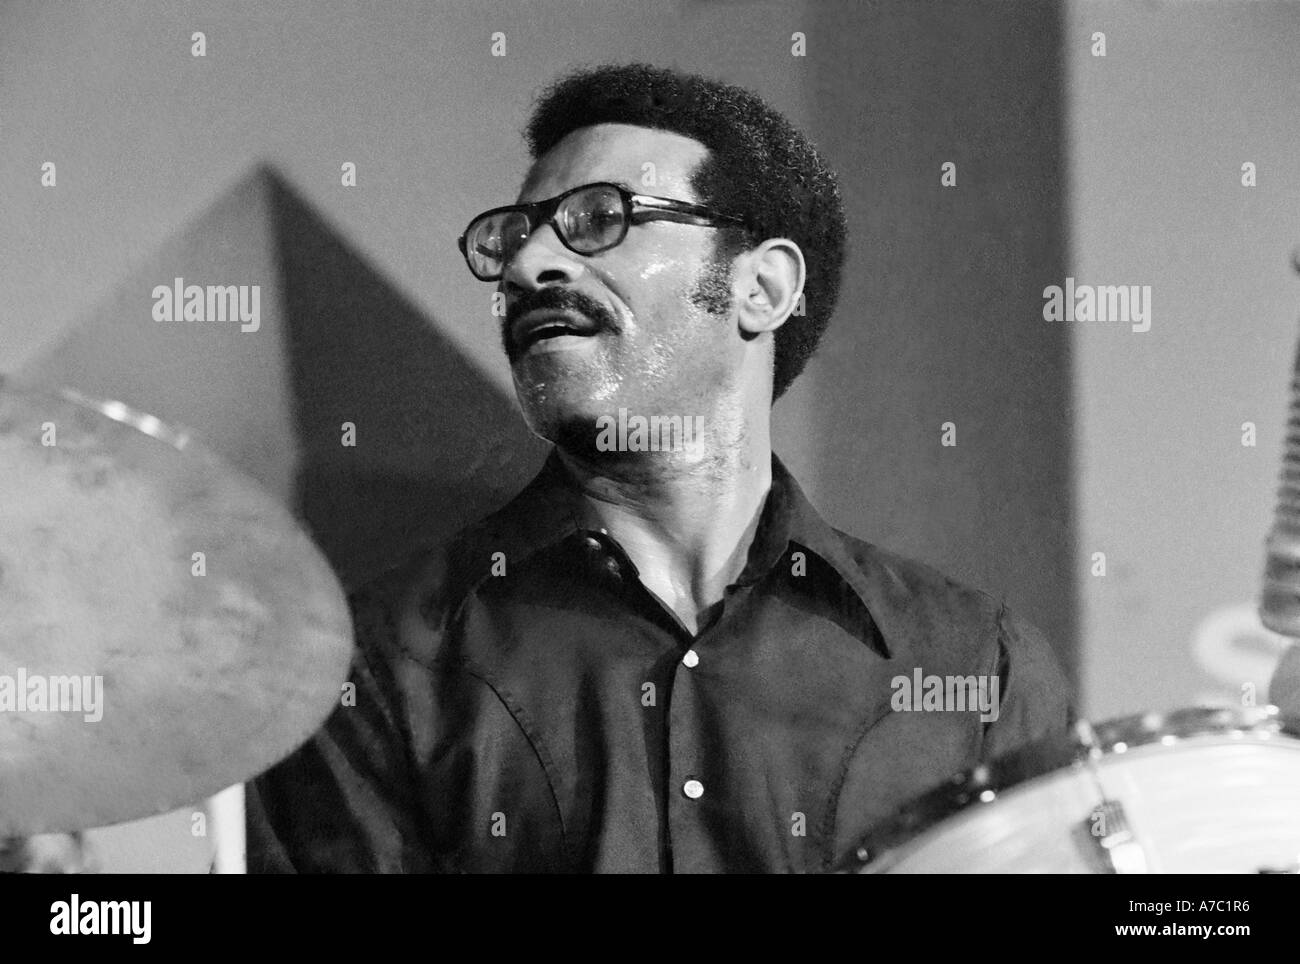 Max Roach plays the drums. Stock Photo